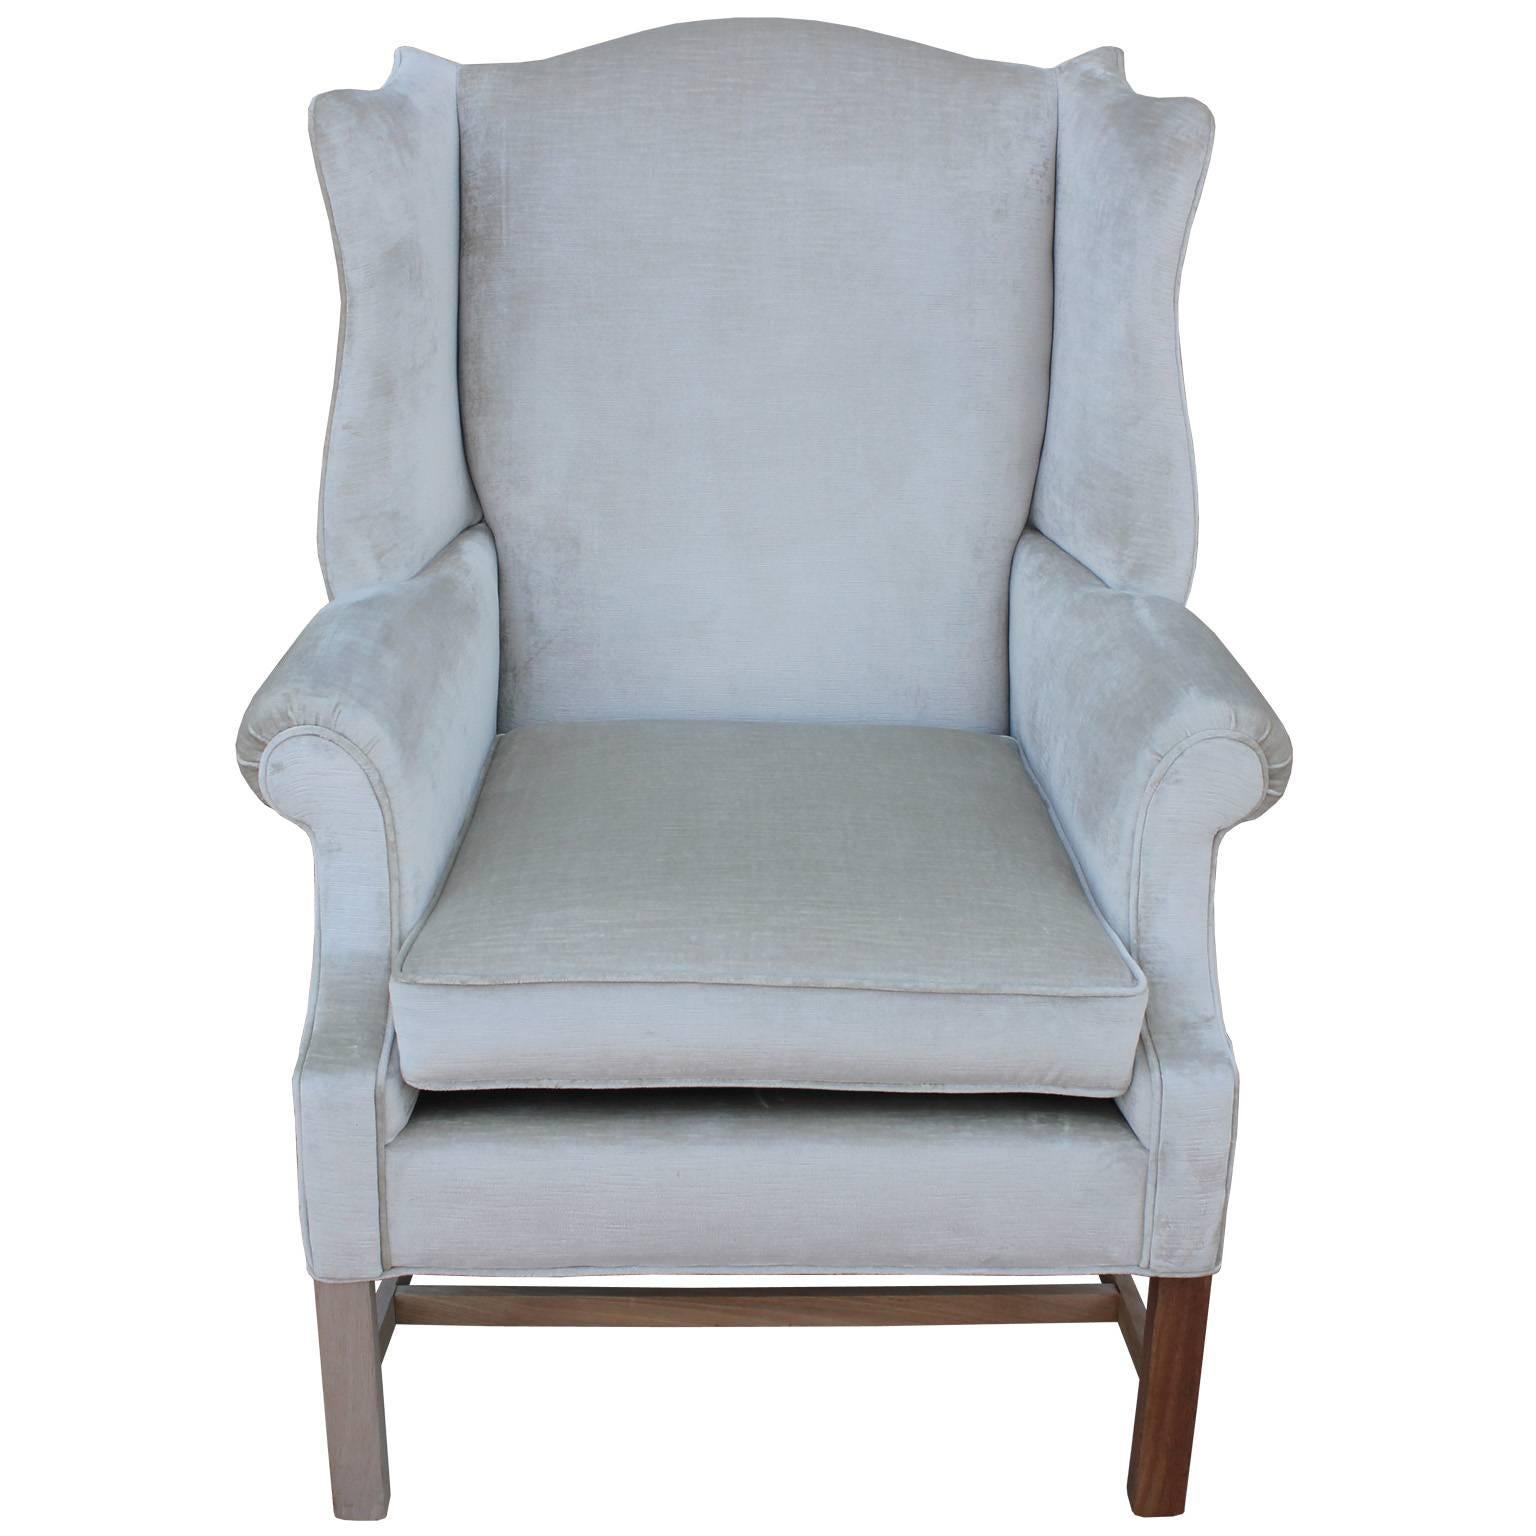 Fabulous pair of wingback lounge chairs. Chairs have incredible, sculptural lines. Freshly upholstered in silver grey velvet. Chairs rest stripped and bleached legs Due to the variation in wood one leg is slightly darker than the rest on one chair.